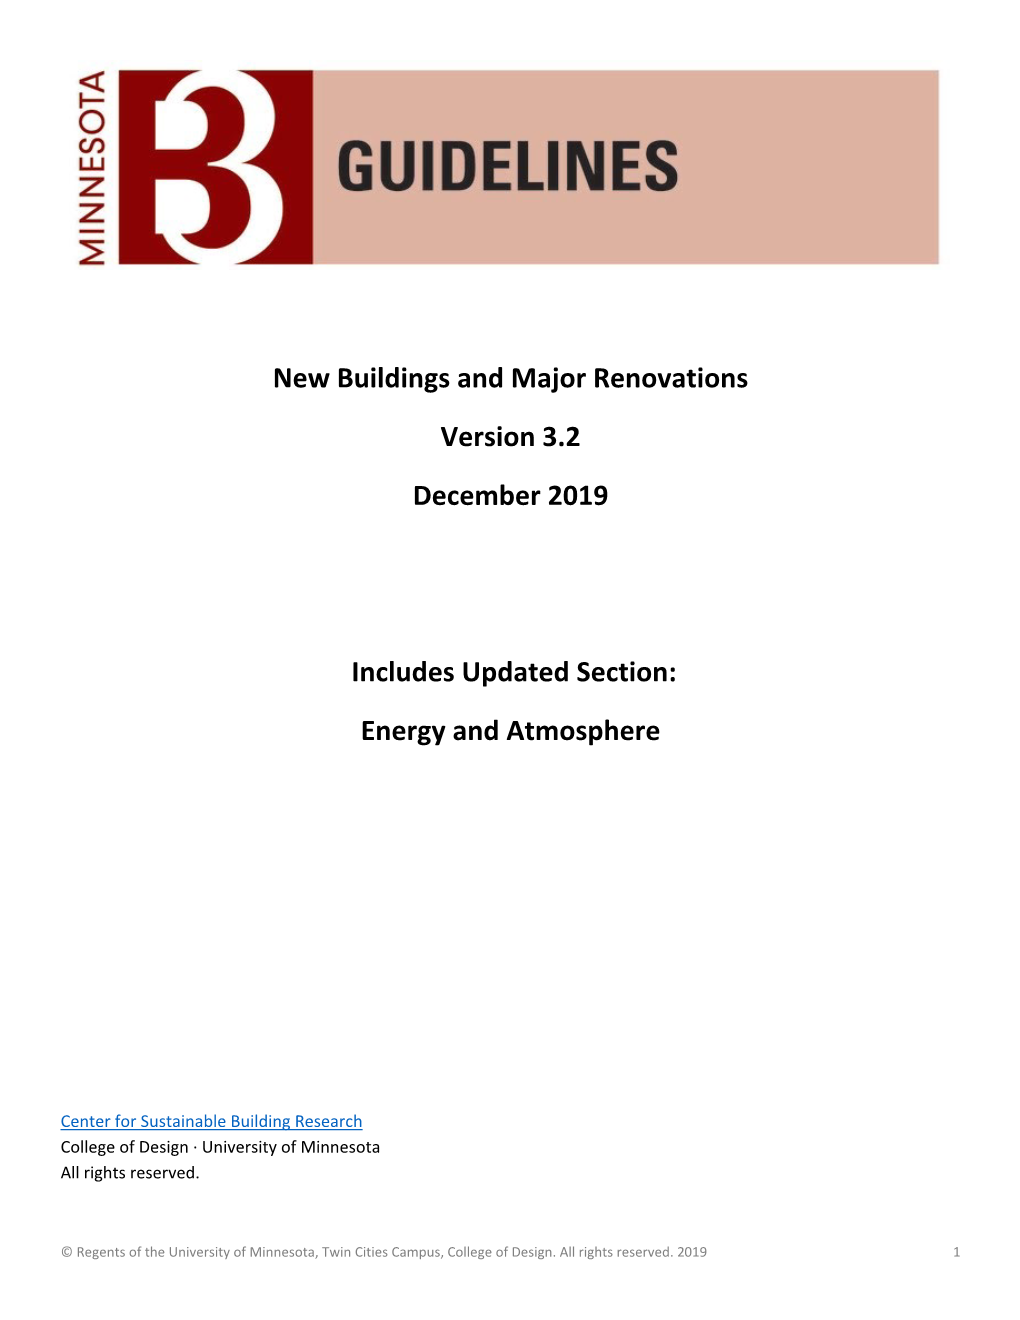 New Buildings and Major Renovations Version 3.2 December 2019 Includes Updated Section: Energy and Atmosphere